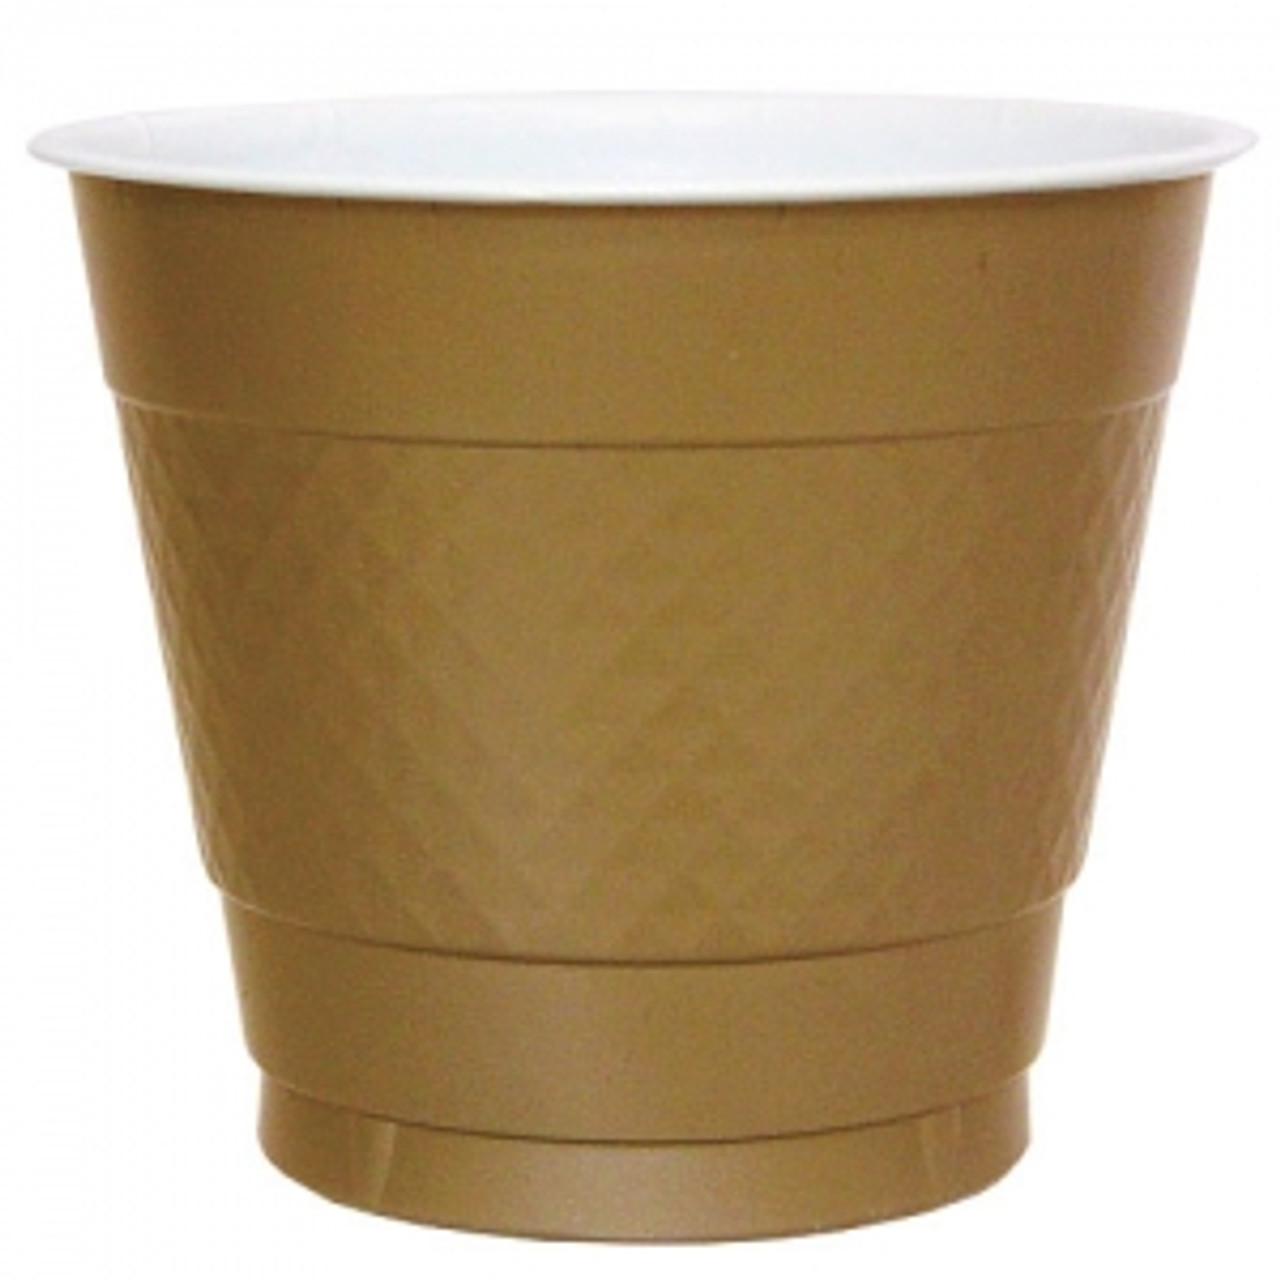 https://cdn11.bigcommerce.com/s-hgqmwywp99/images/stencil/1280x1280/products/49300/44091/9oz-gold-plastic-cups-50ct-5__91211.1675880311.jpg?c=1?imbypass=on